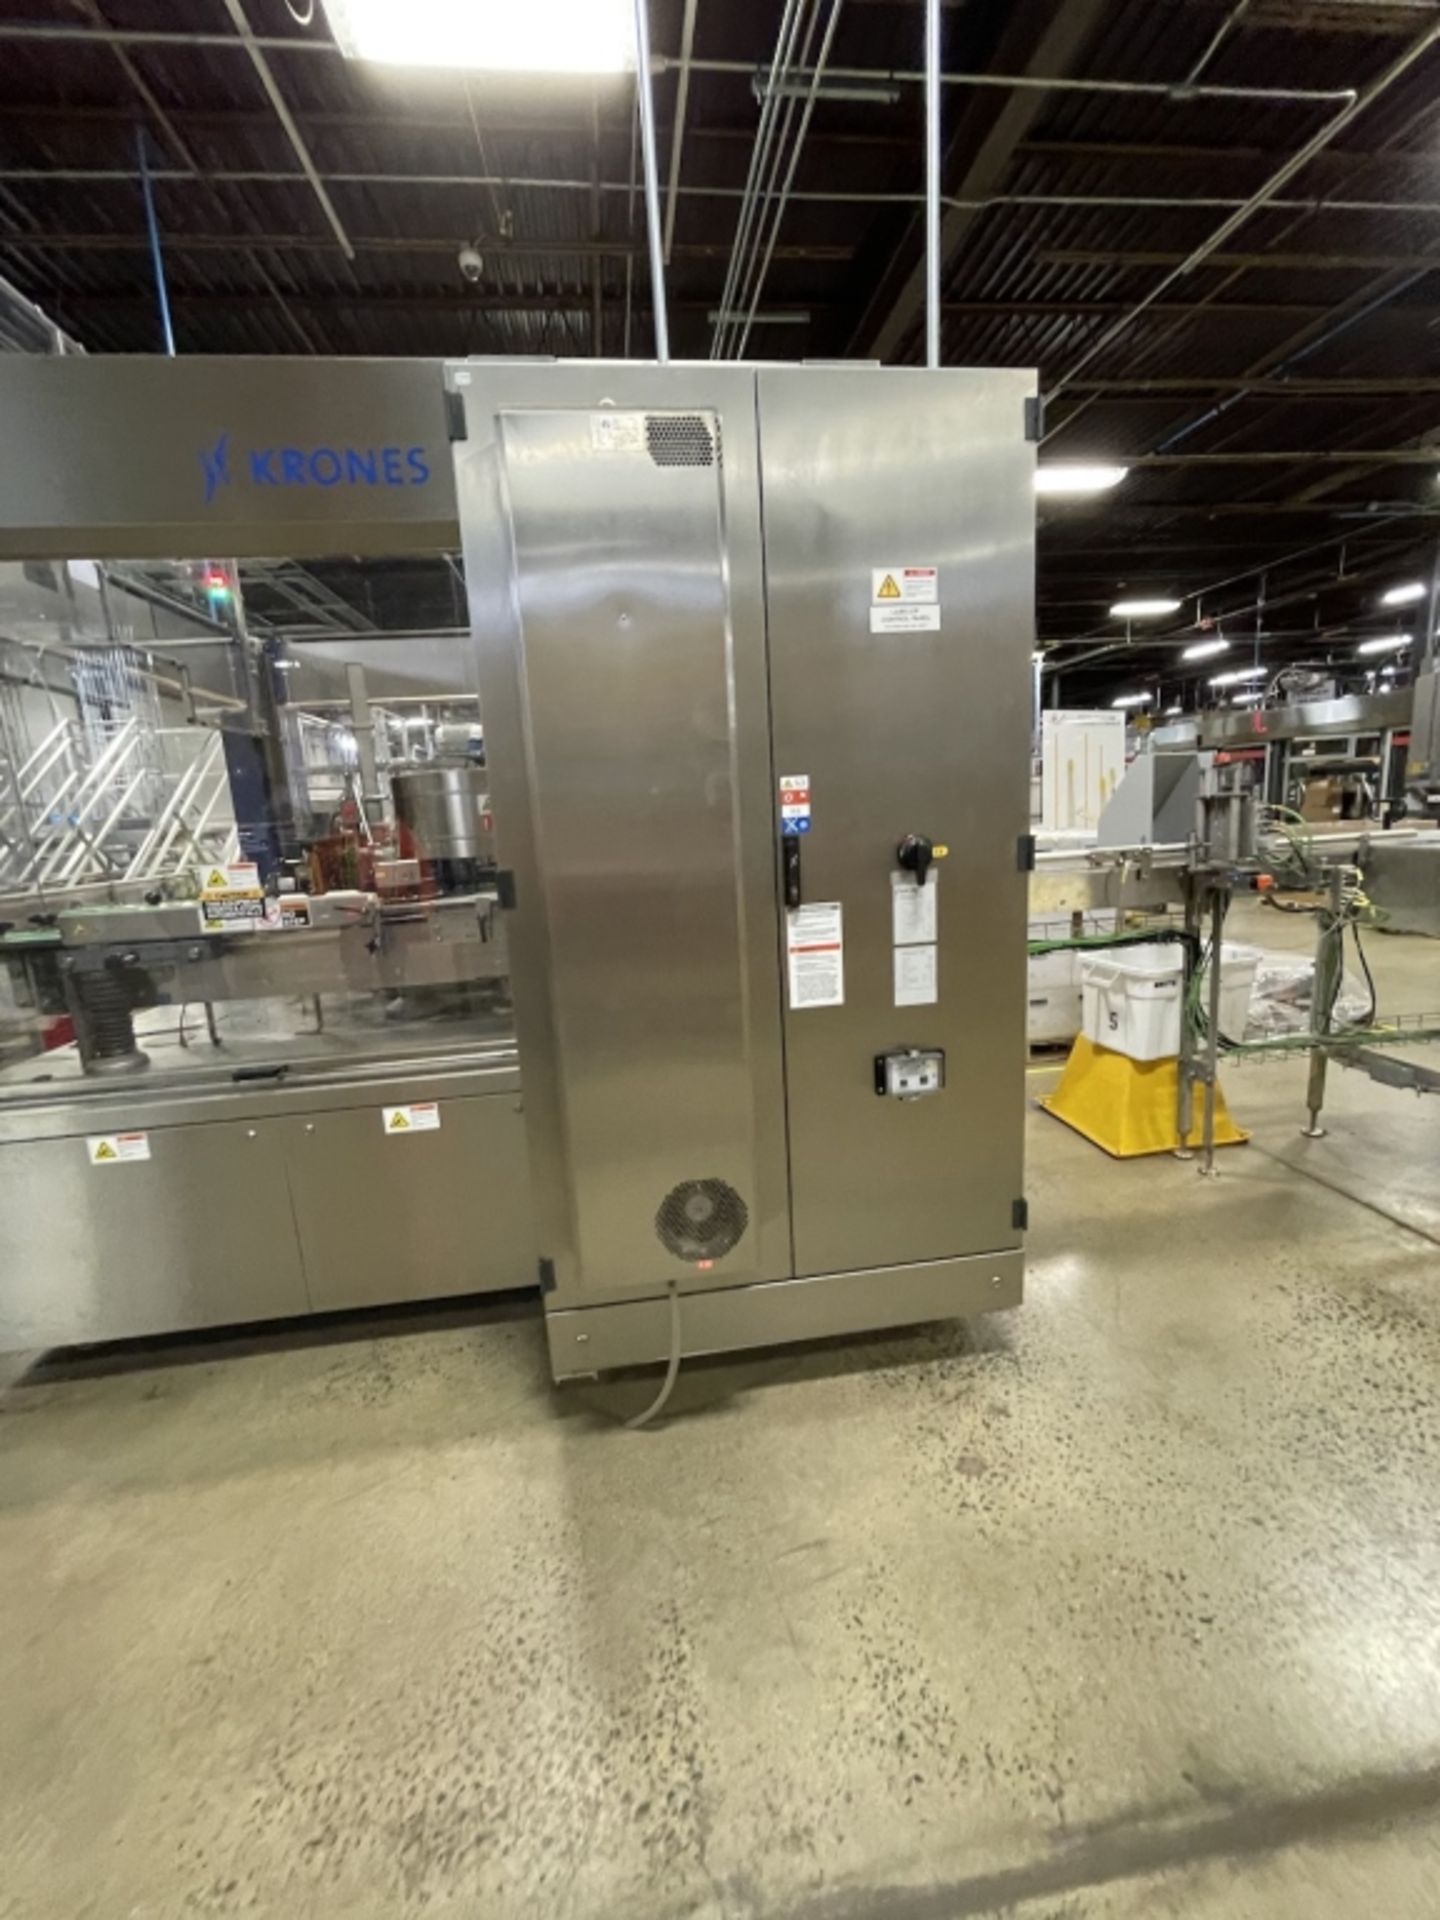 KRONES CONTIROLL ROLL-FED WRAP AROUND LABELER, S/N K745X66, 340 MM MAX LABEL LENGTH, 175 MIN LABEL - Image 5 of 11